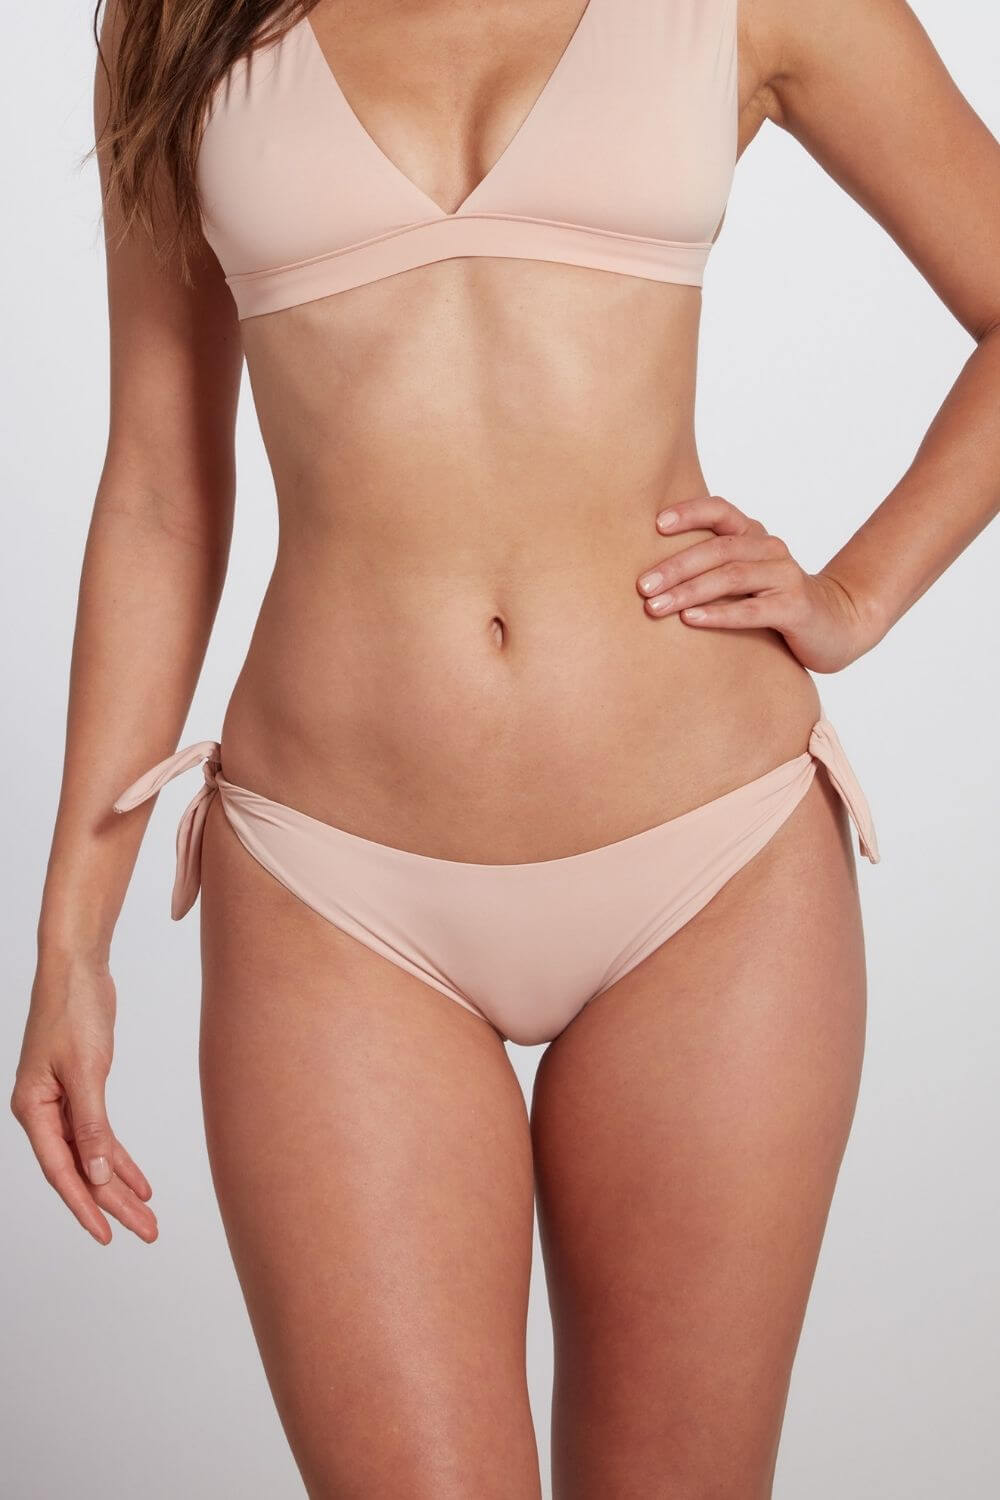 The Fanny tie-side bikini bottom in pink blush. A low rise brief with moderate coverage.